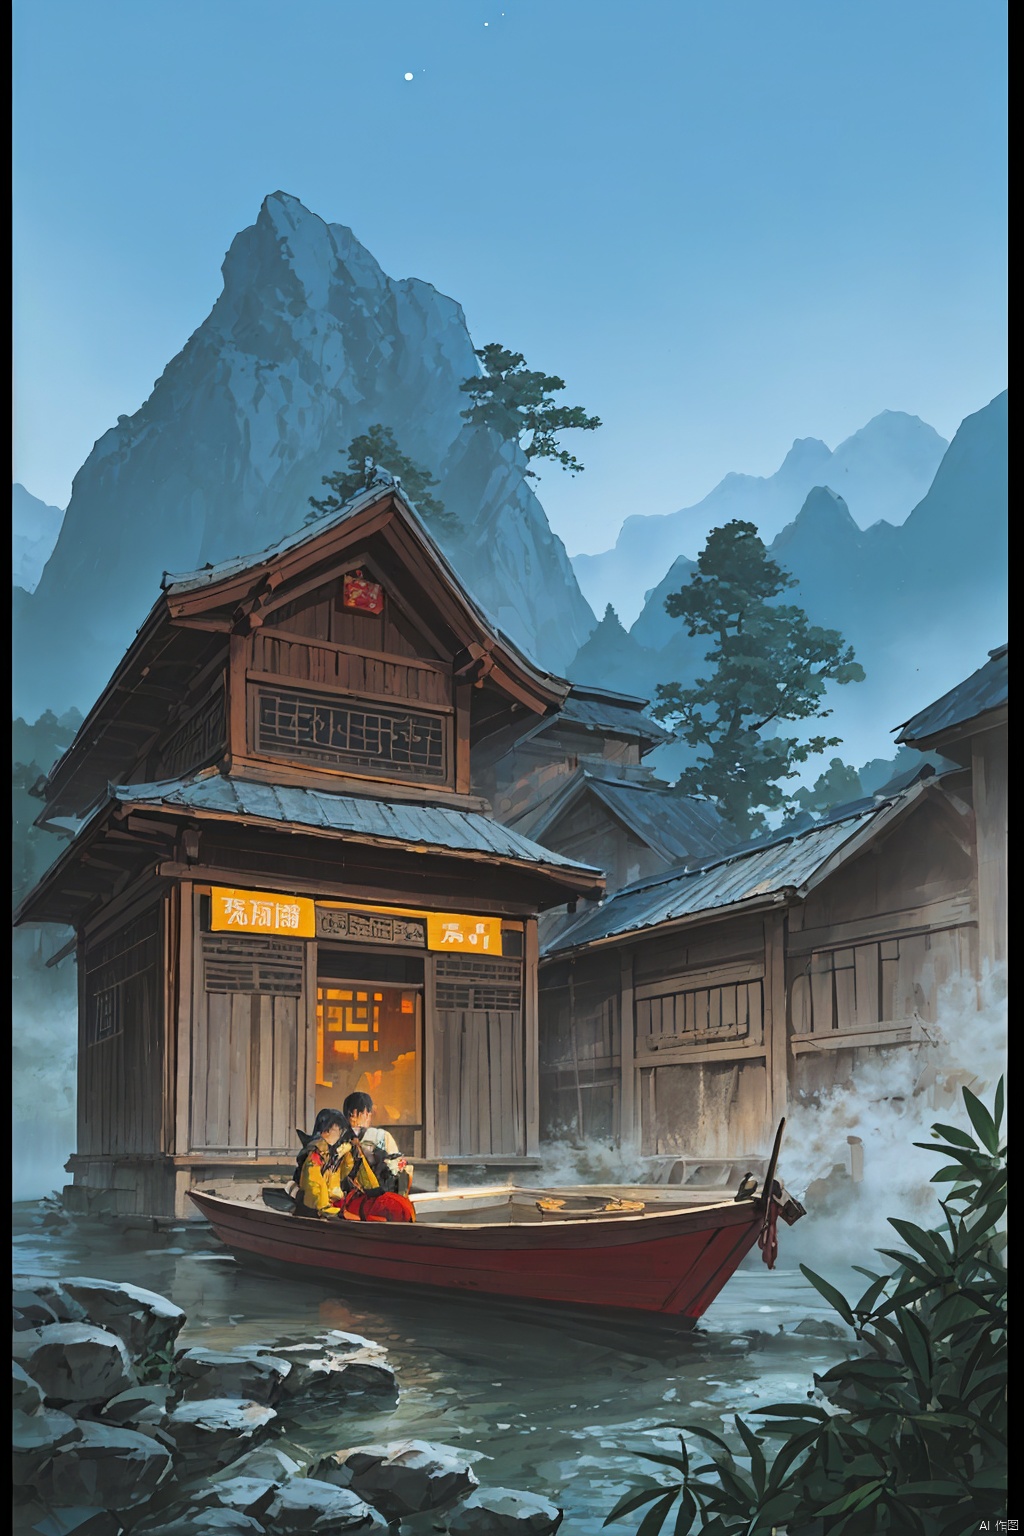 Jiangnan Water Town, pavilions and pavilions, traditional style, the starry sky is fascinated by mountains and fields, with fog, lights, people returning, exotic flowers and plants, maple leaf boat, bright fishing fire, HD plants, realistic portrayal, 4K